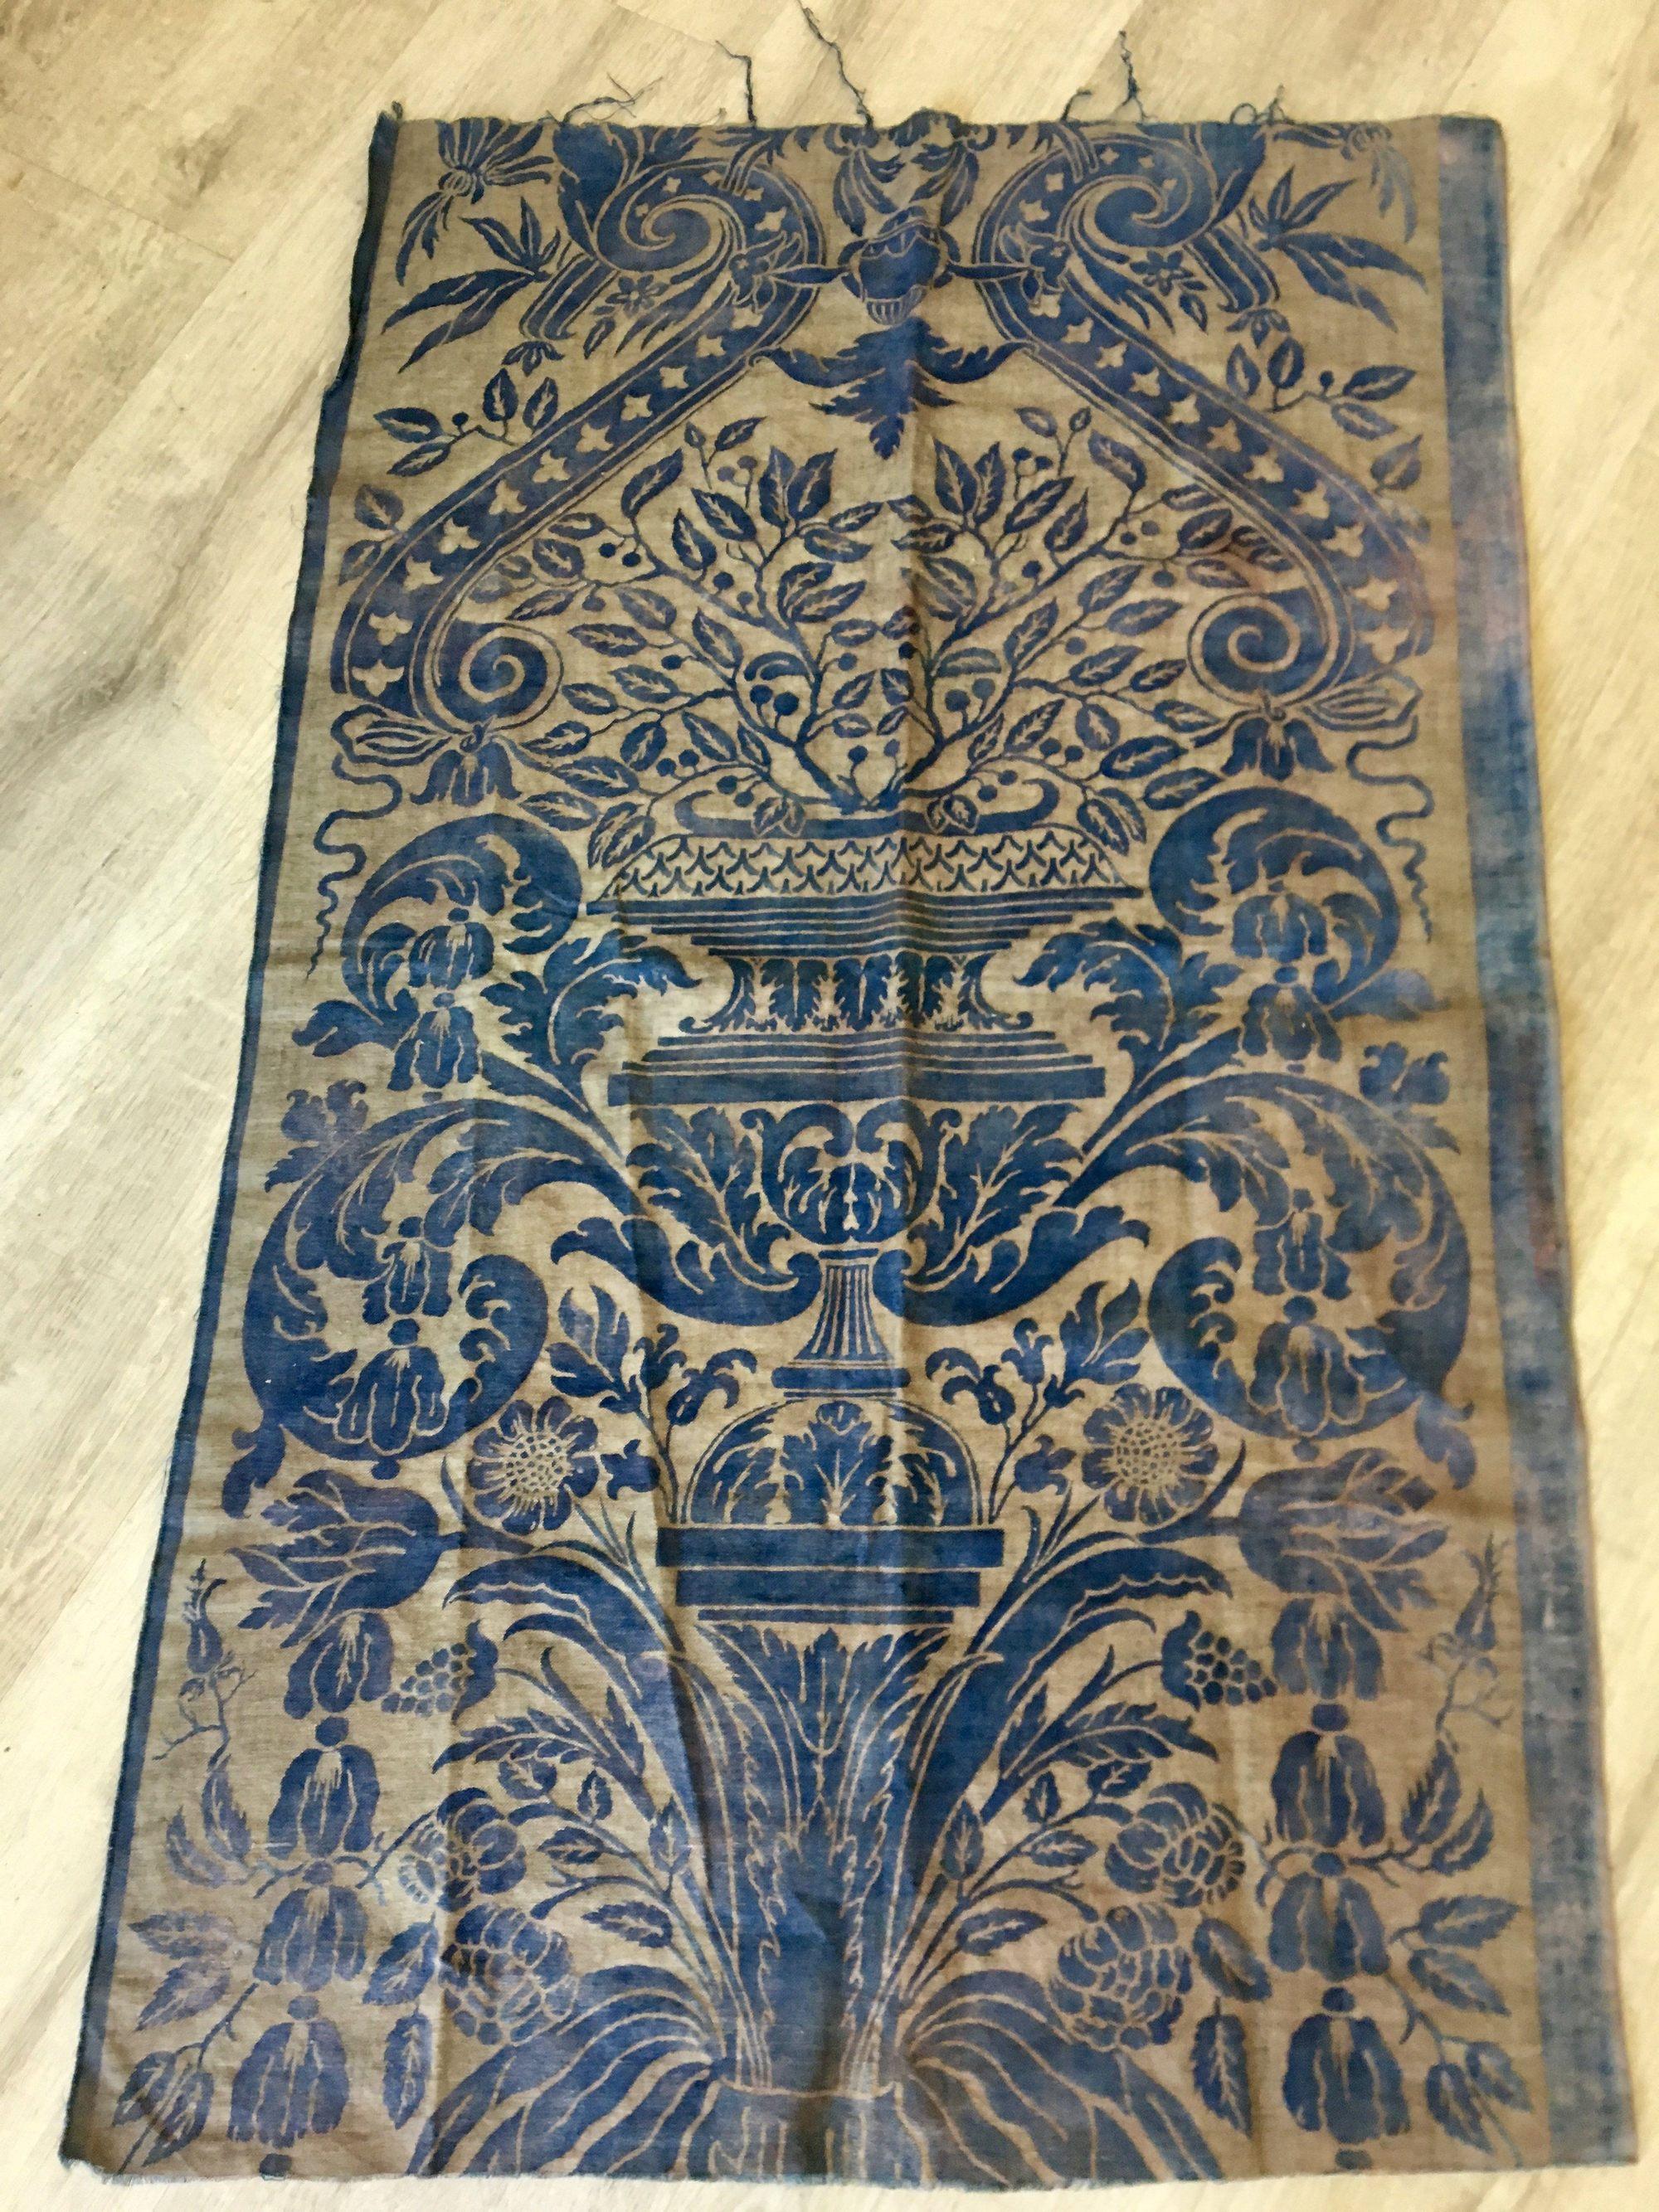 Vintage piece of Fortuny fabric, linen, deep blues over a silver/blue field, stamped “Soc. An Fortuny”, early mid-20th century.